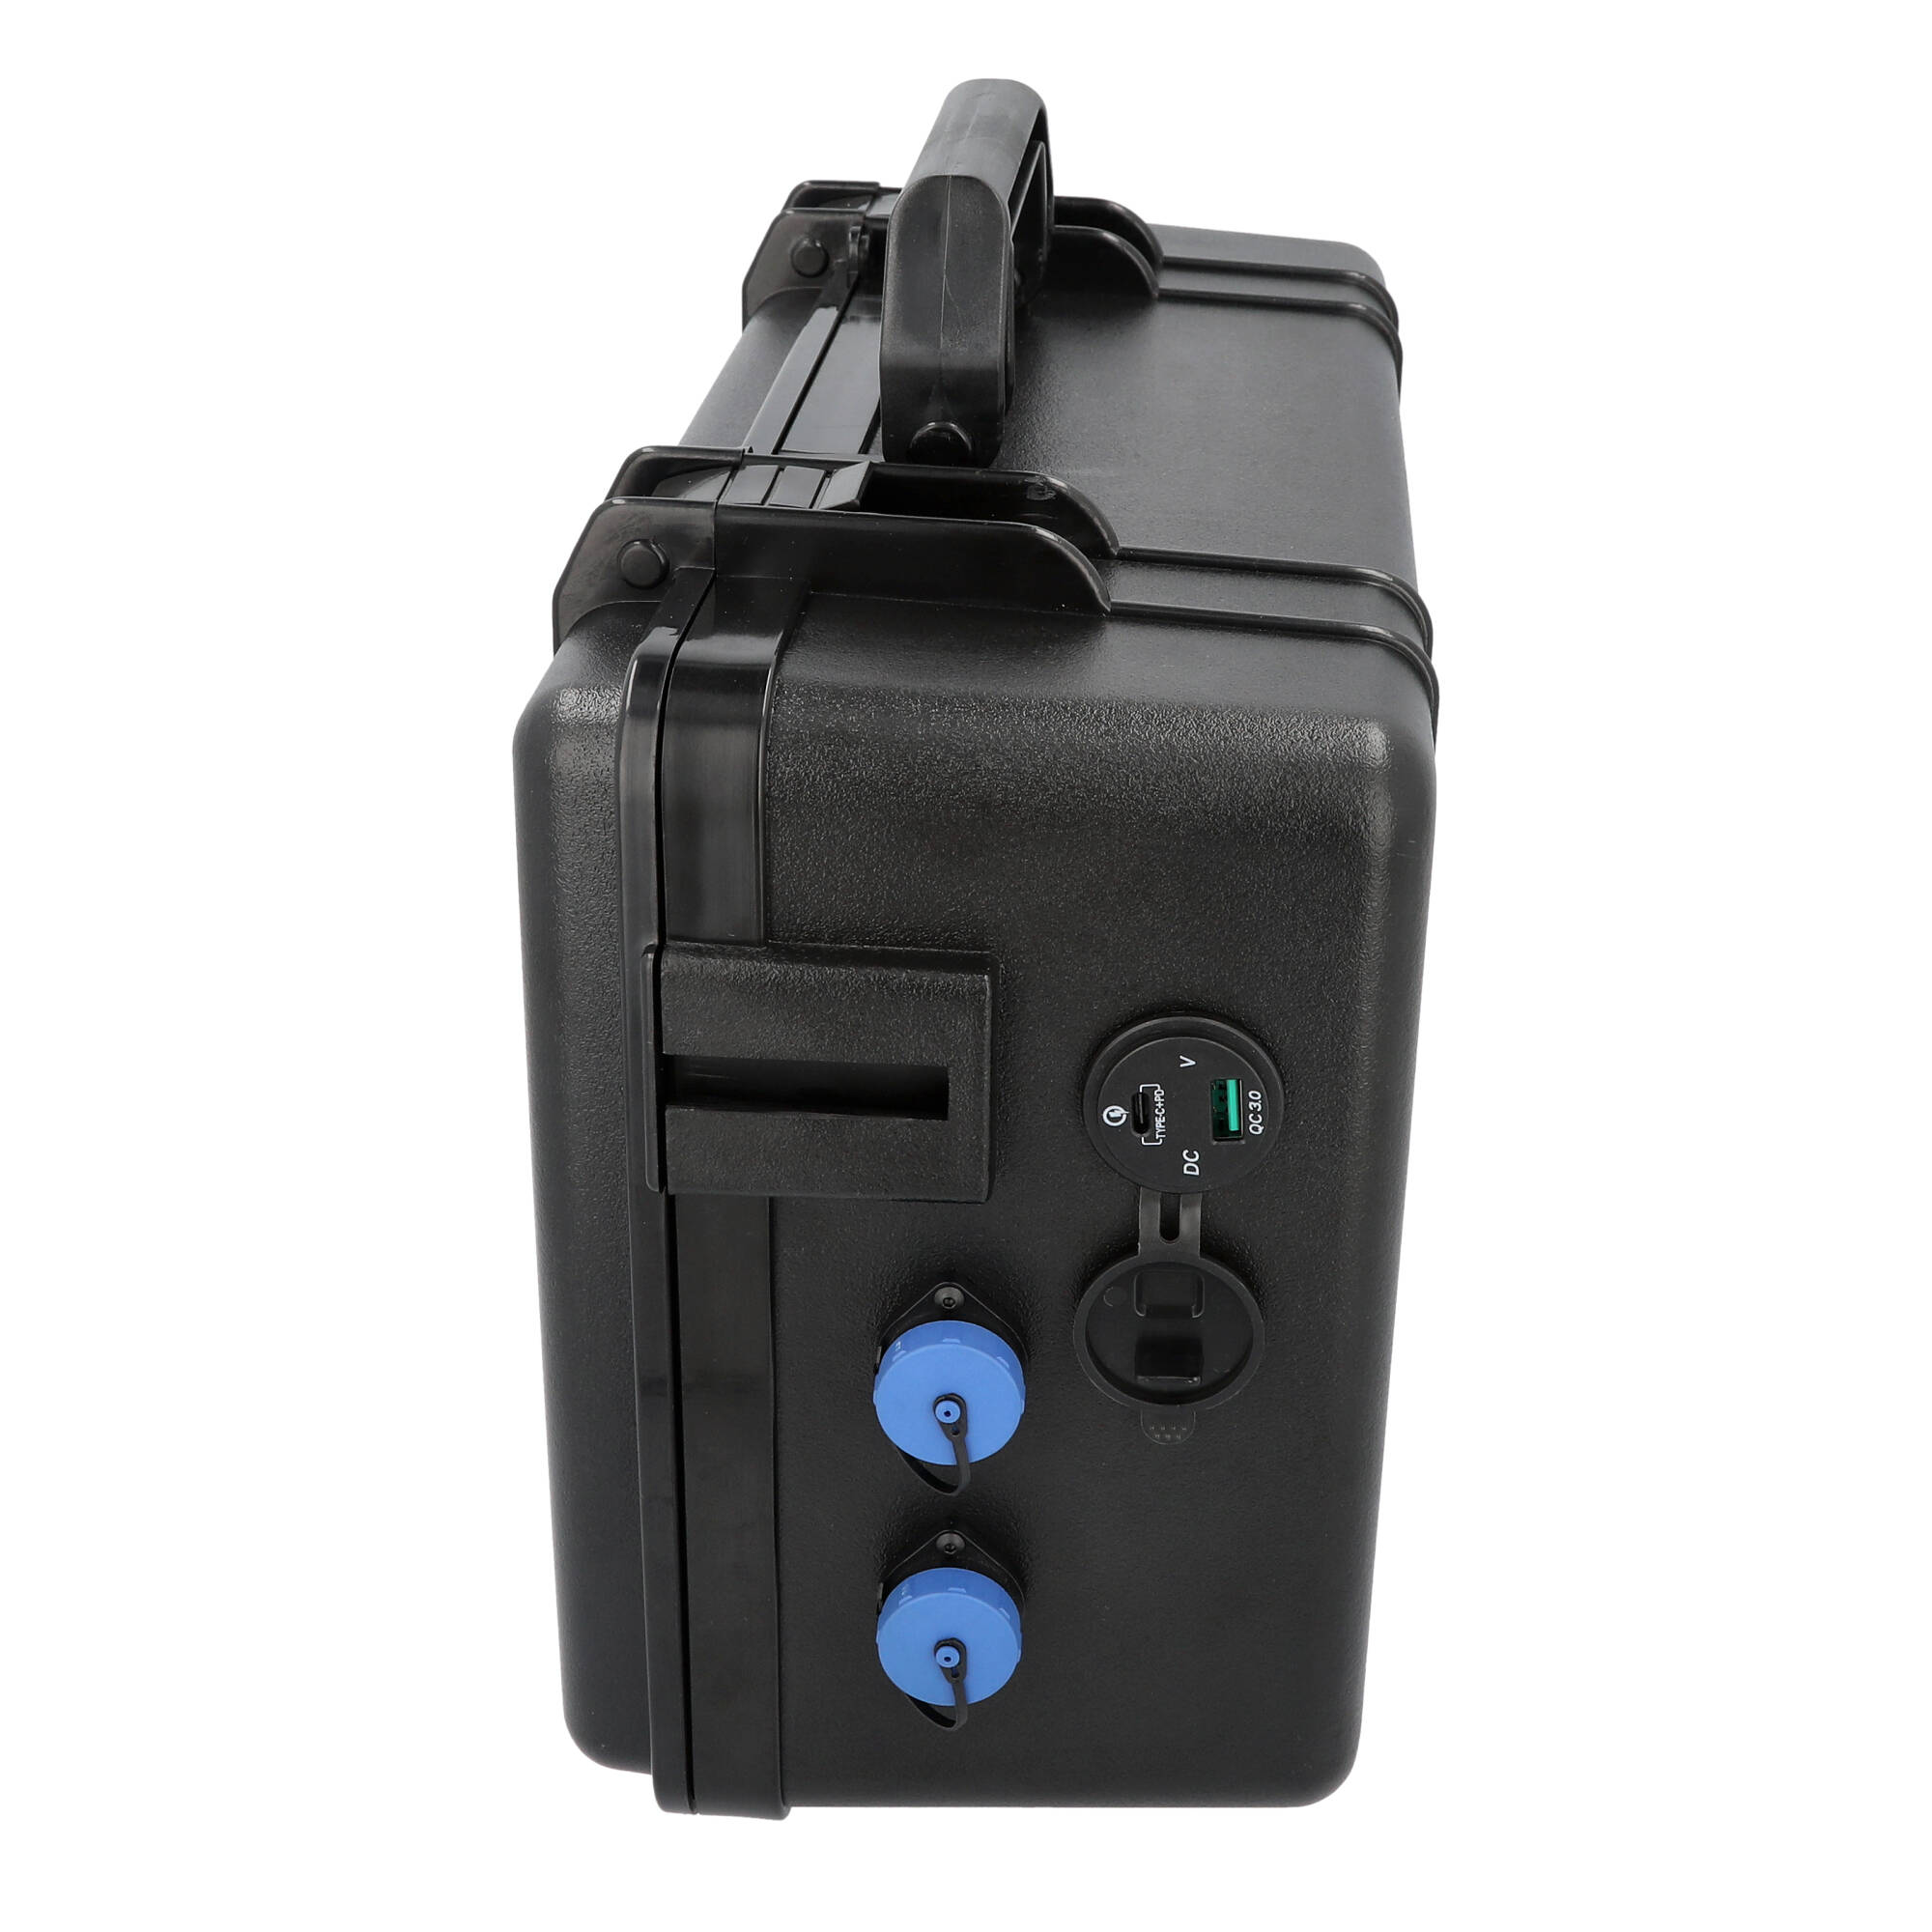 EP-1400Wh: Battery case Power Station 36V 40Ah BMS 60A with M50T (2000 Watt) 390 x 293 x 172 mm